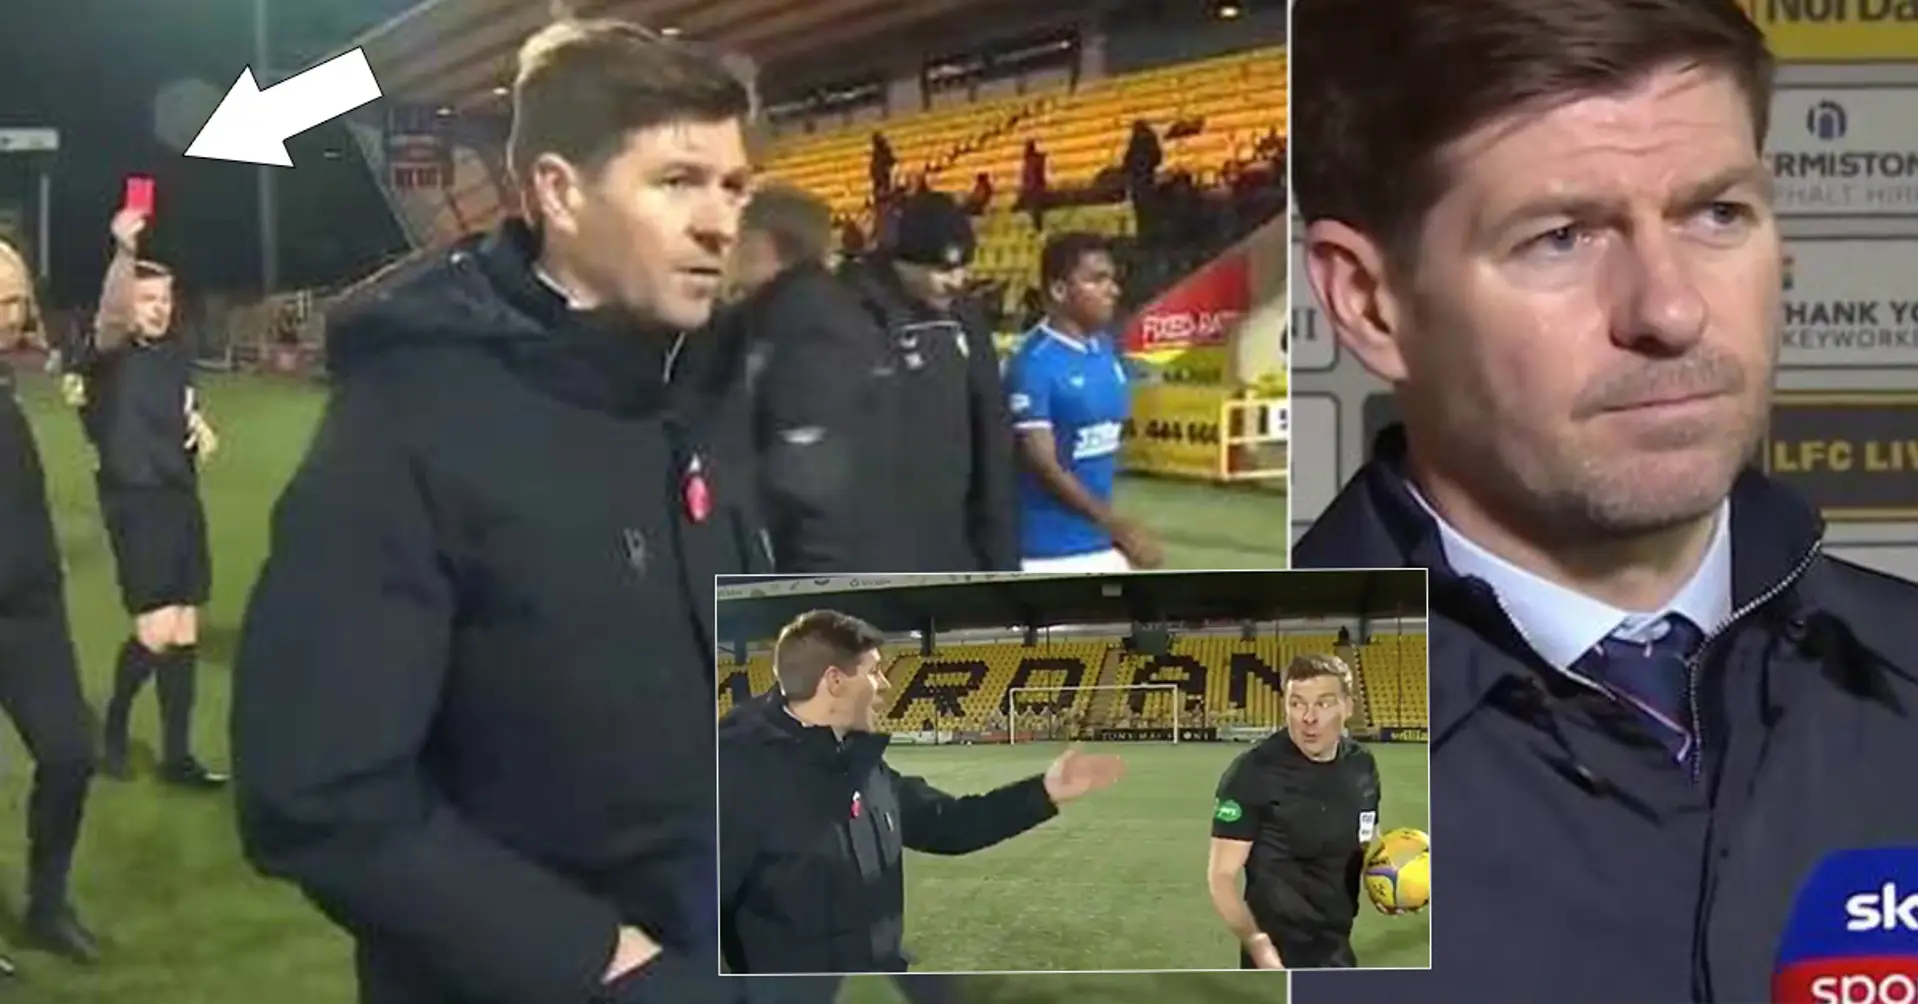 Cameras catch Steven Gerrard completely losing it at referee, his words picked up by microphones